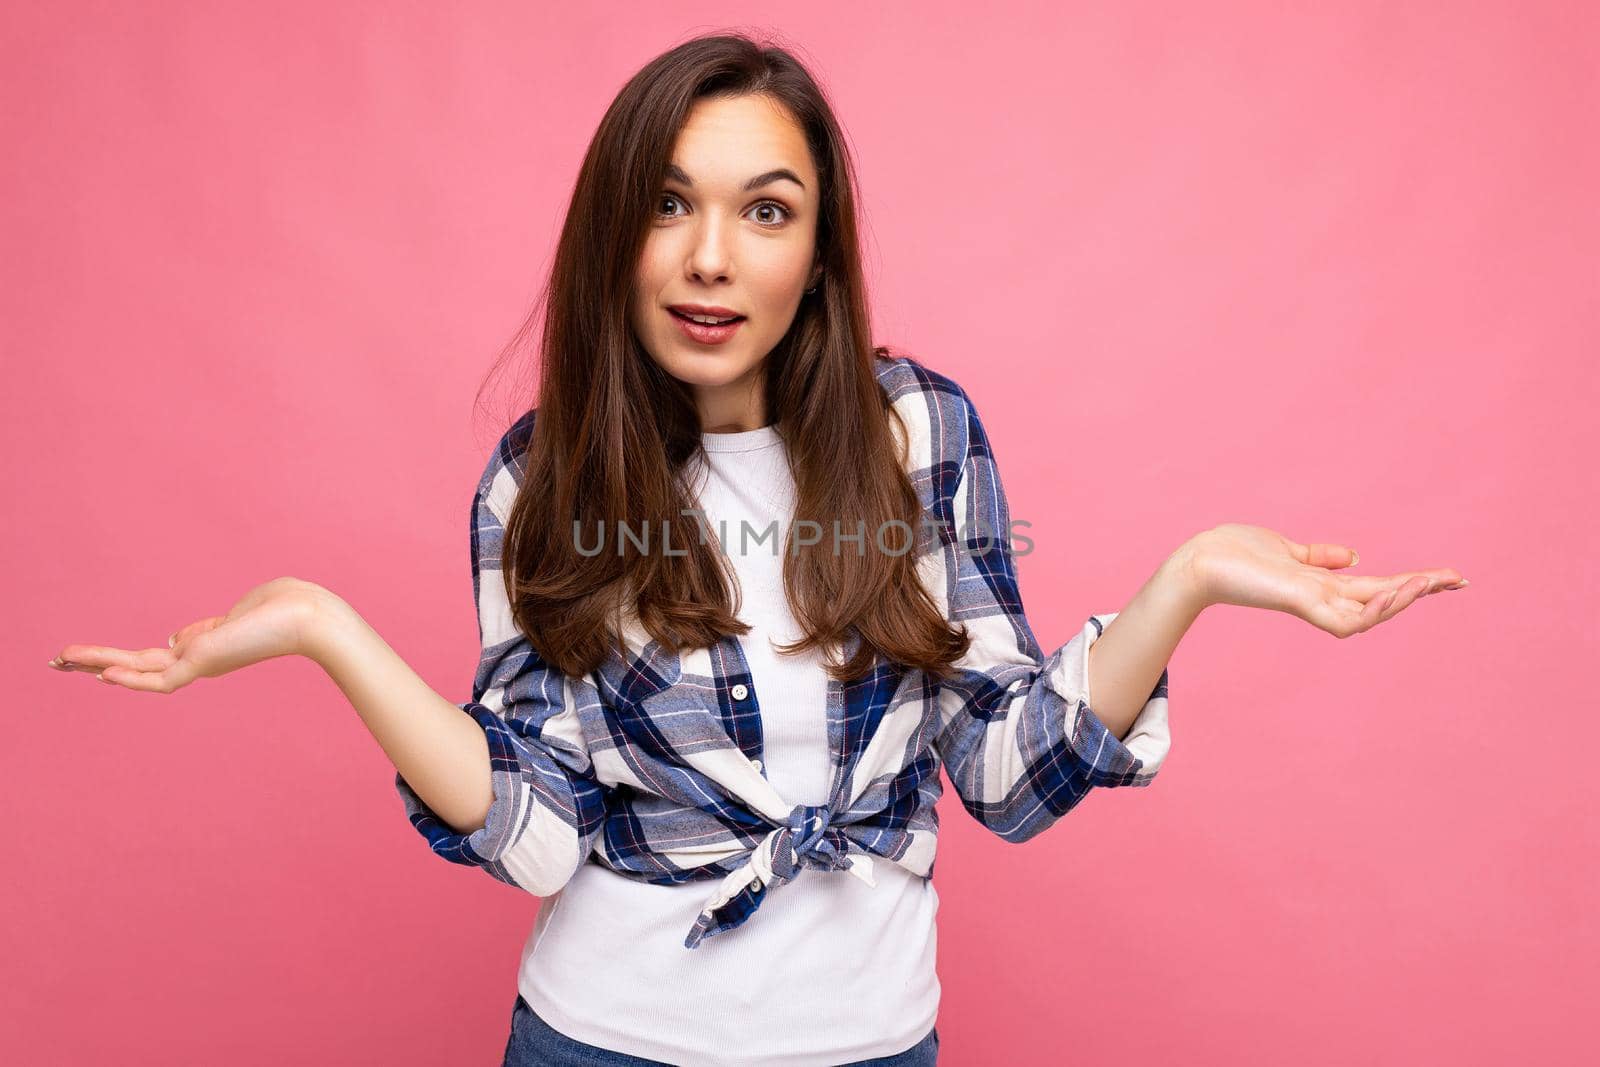 Portrait photo of young thoughtful beautiful brunette woman with sincere emotions wearing stylish check shirt isolated on pink background with copy space and having doubts.